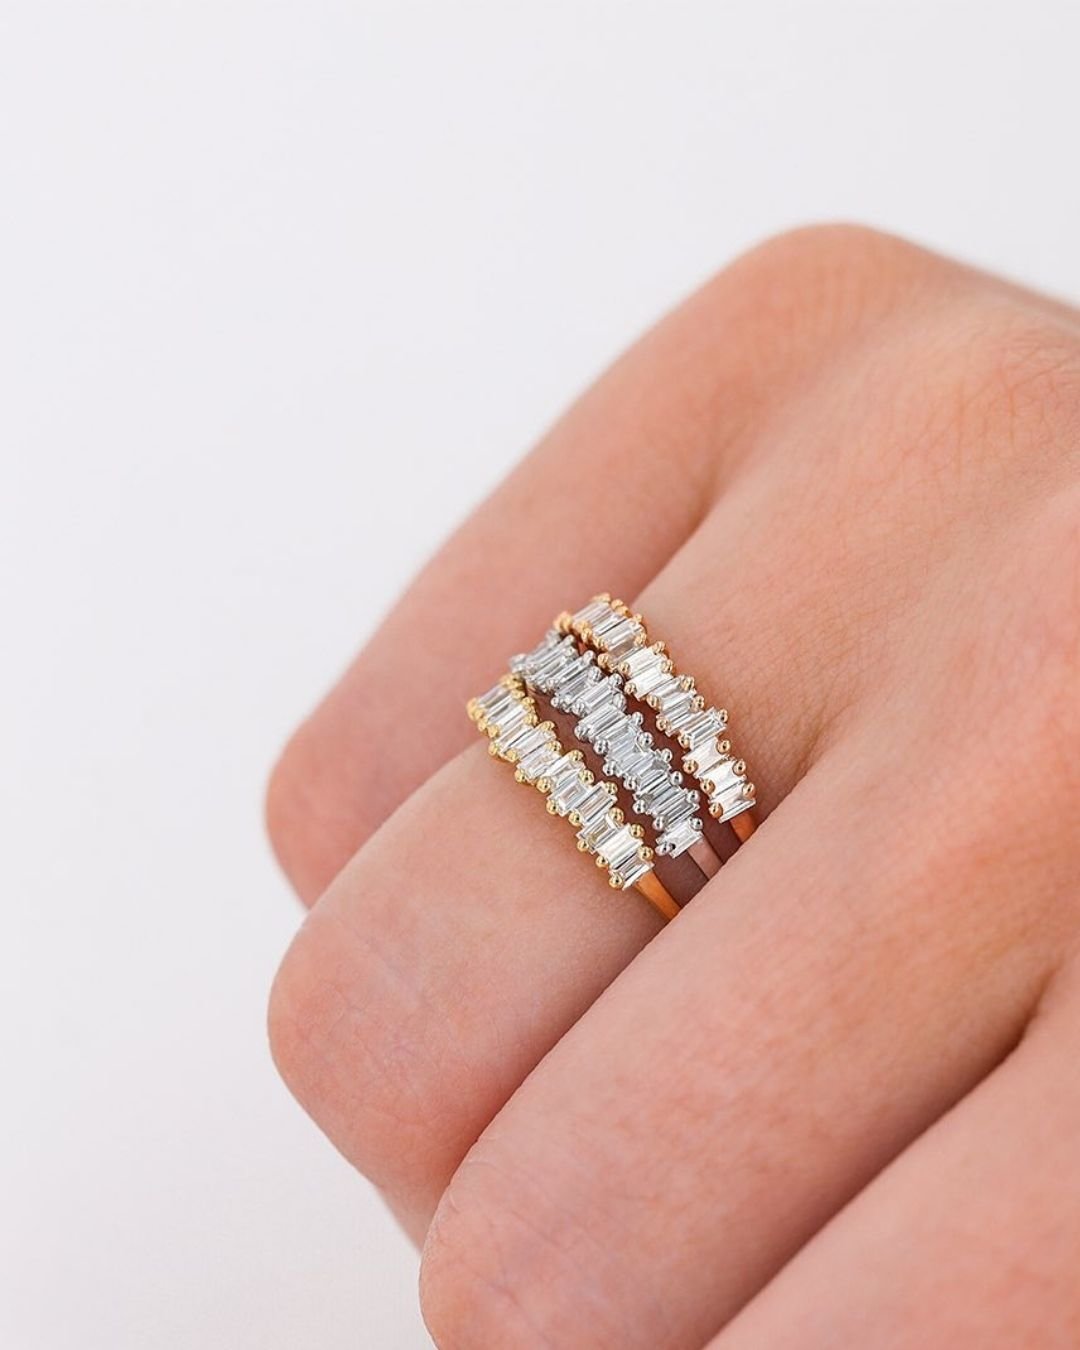 ring trends eternity band rings2